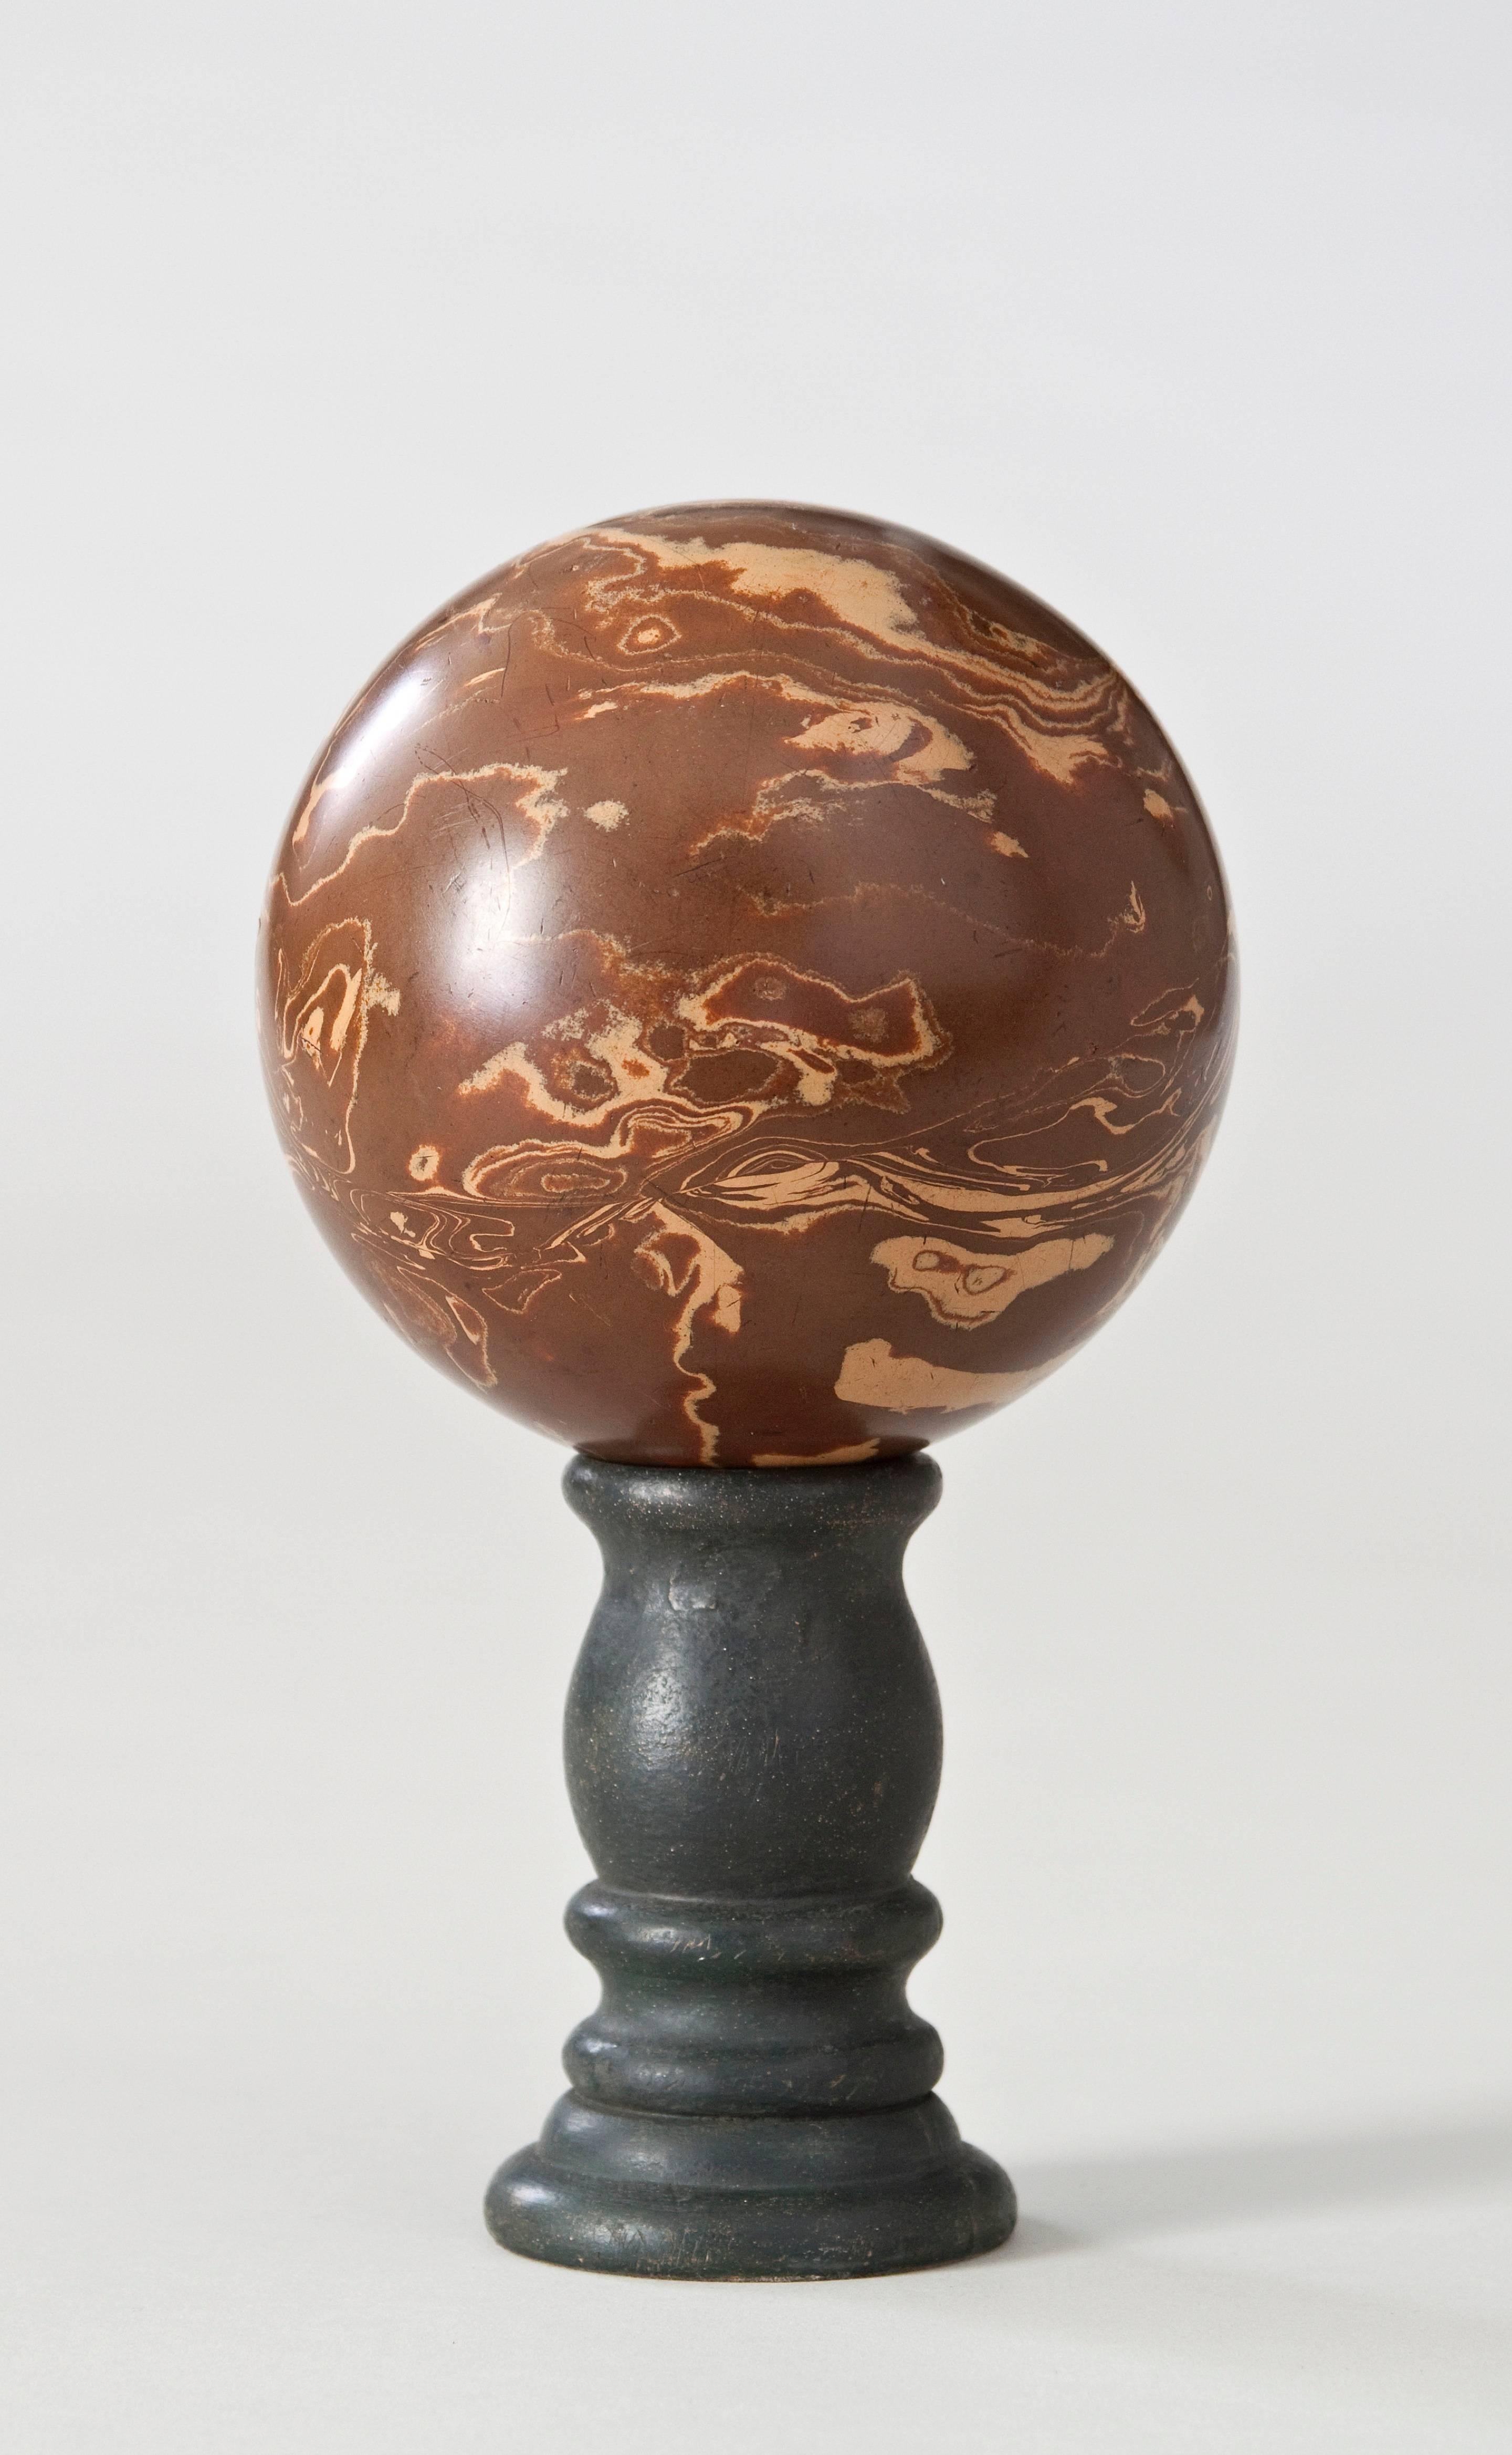 Richly marbled with brown and tan veining. Now on a stand.